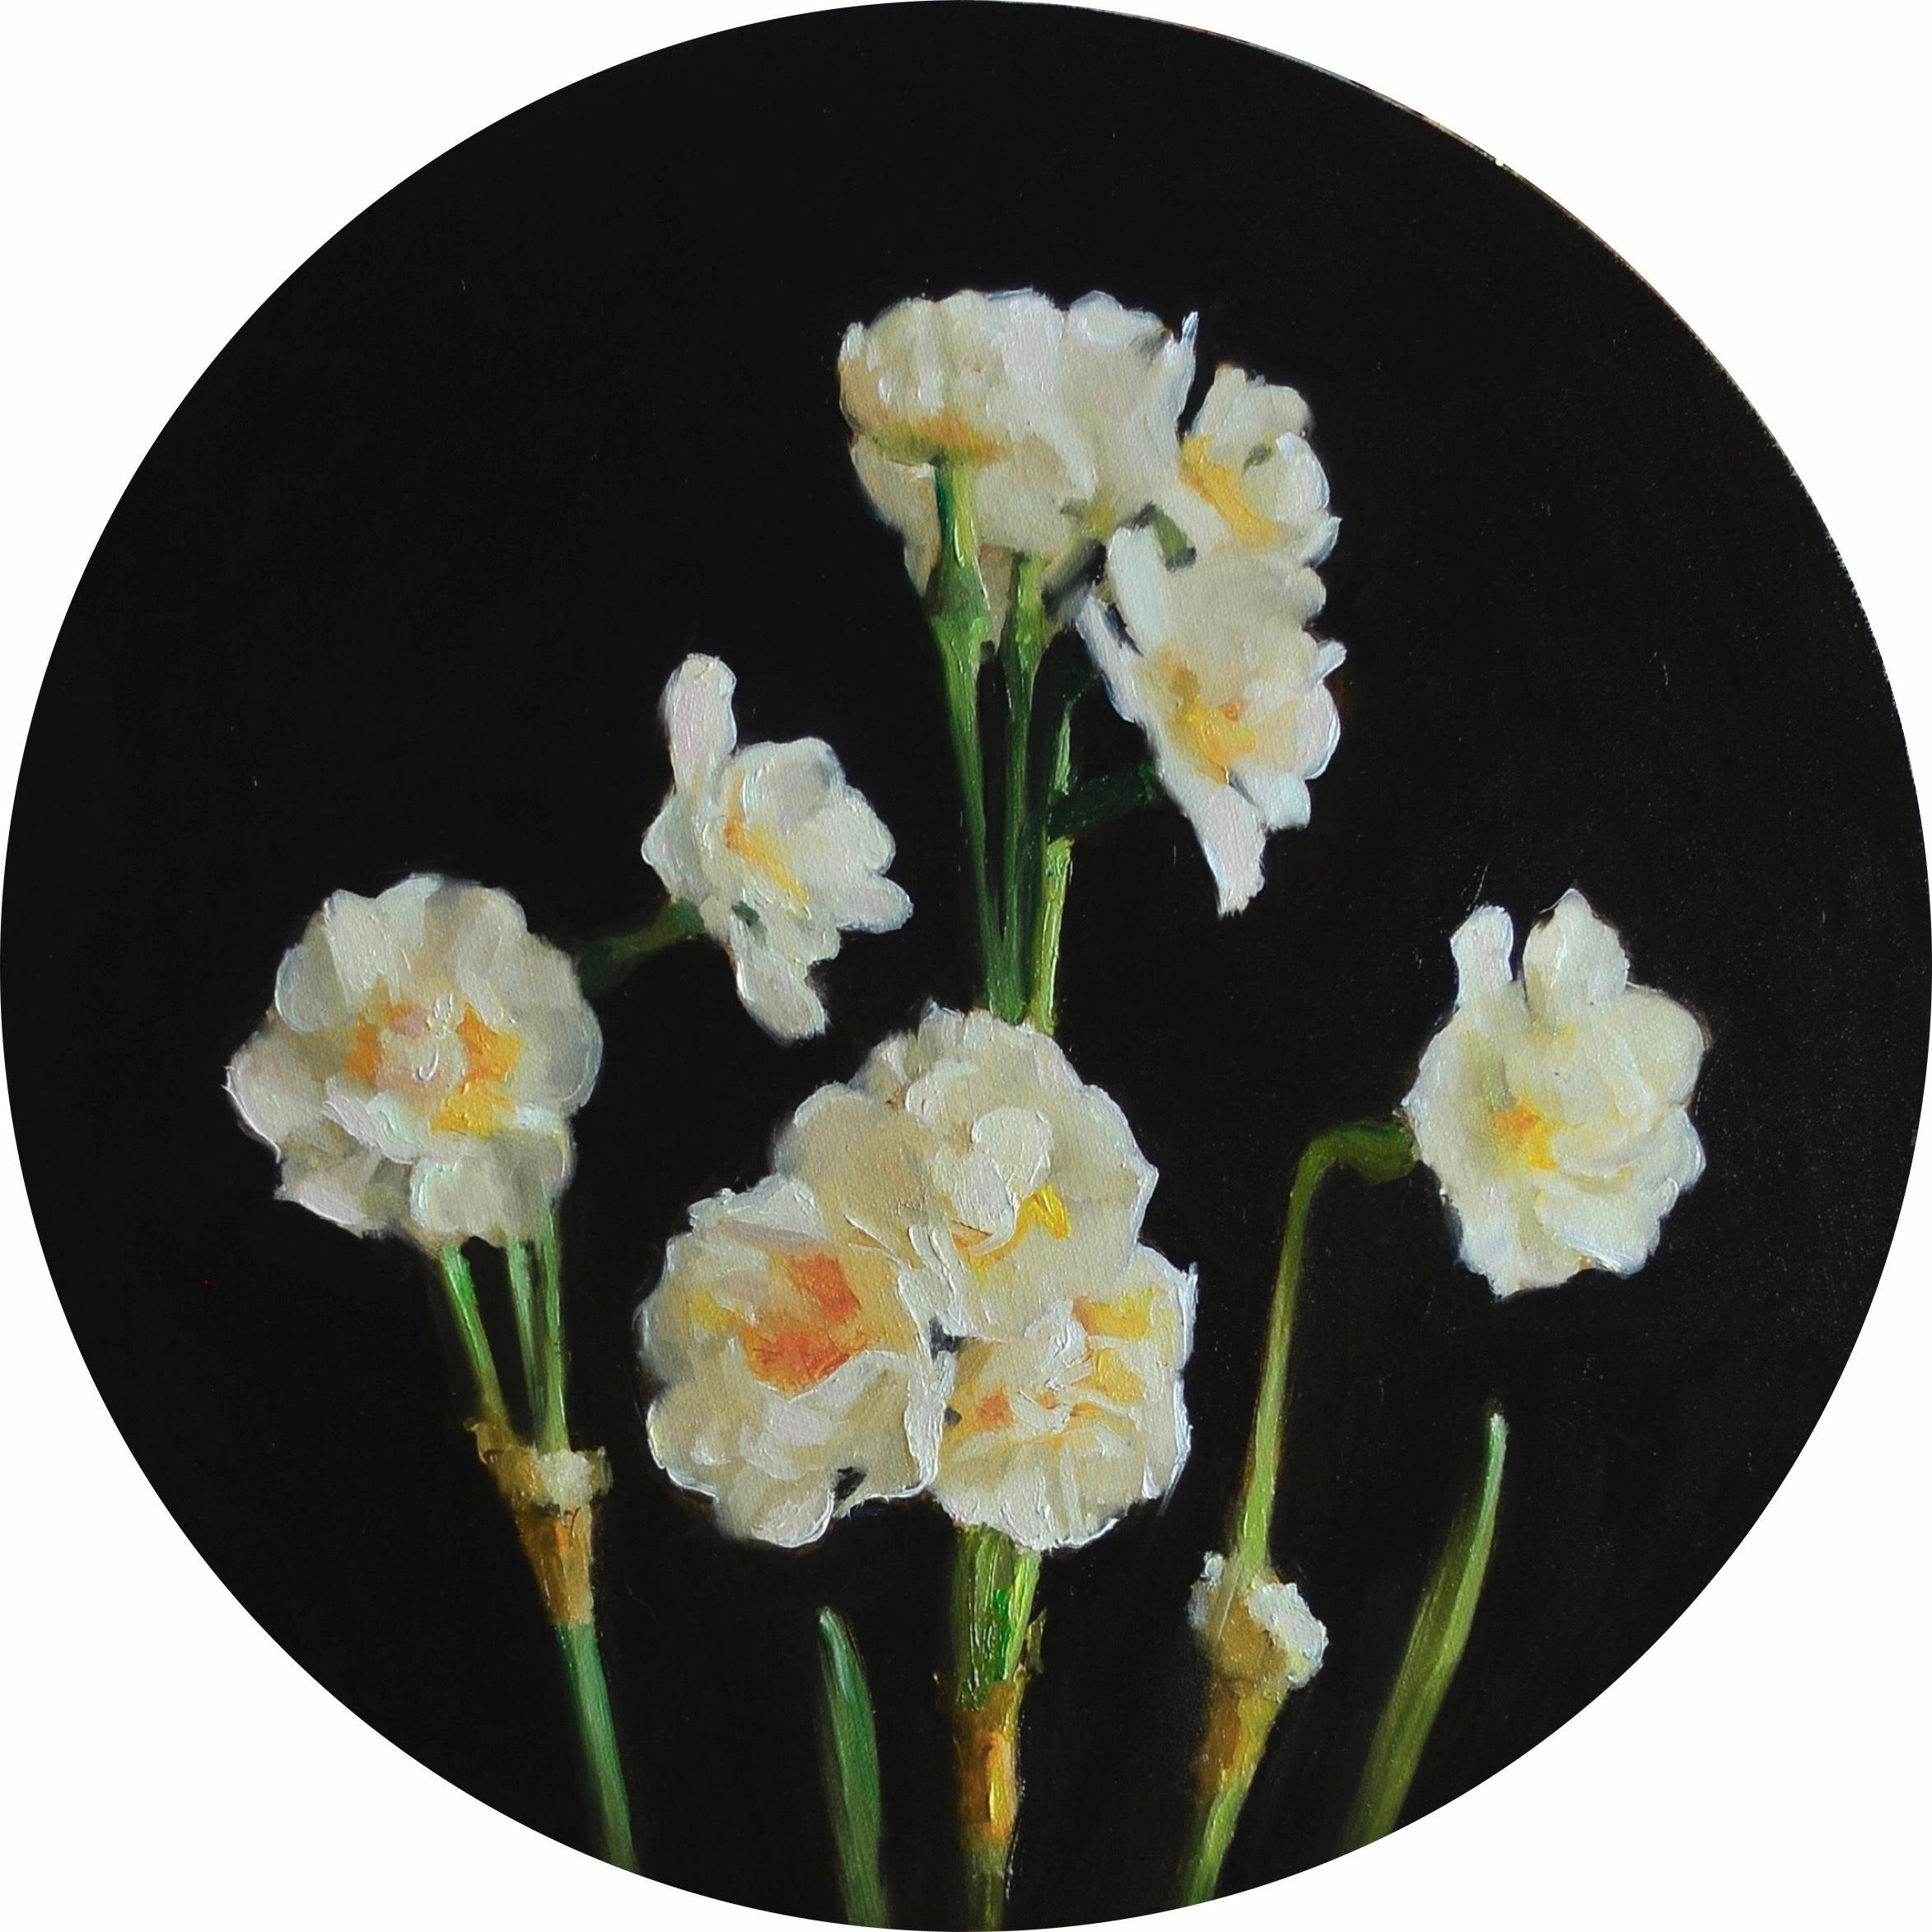 Daffodils - 21st Century Contemporary Realism Floral Oil Painting - Brown Figurative Painting by Ksenya Istomina